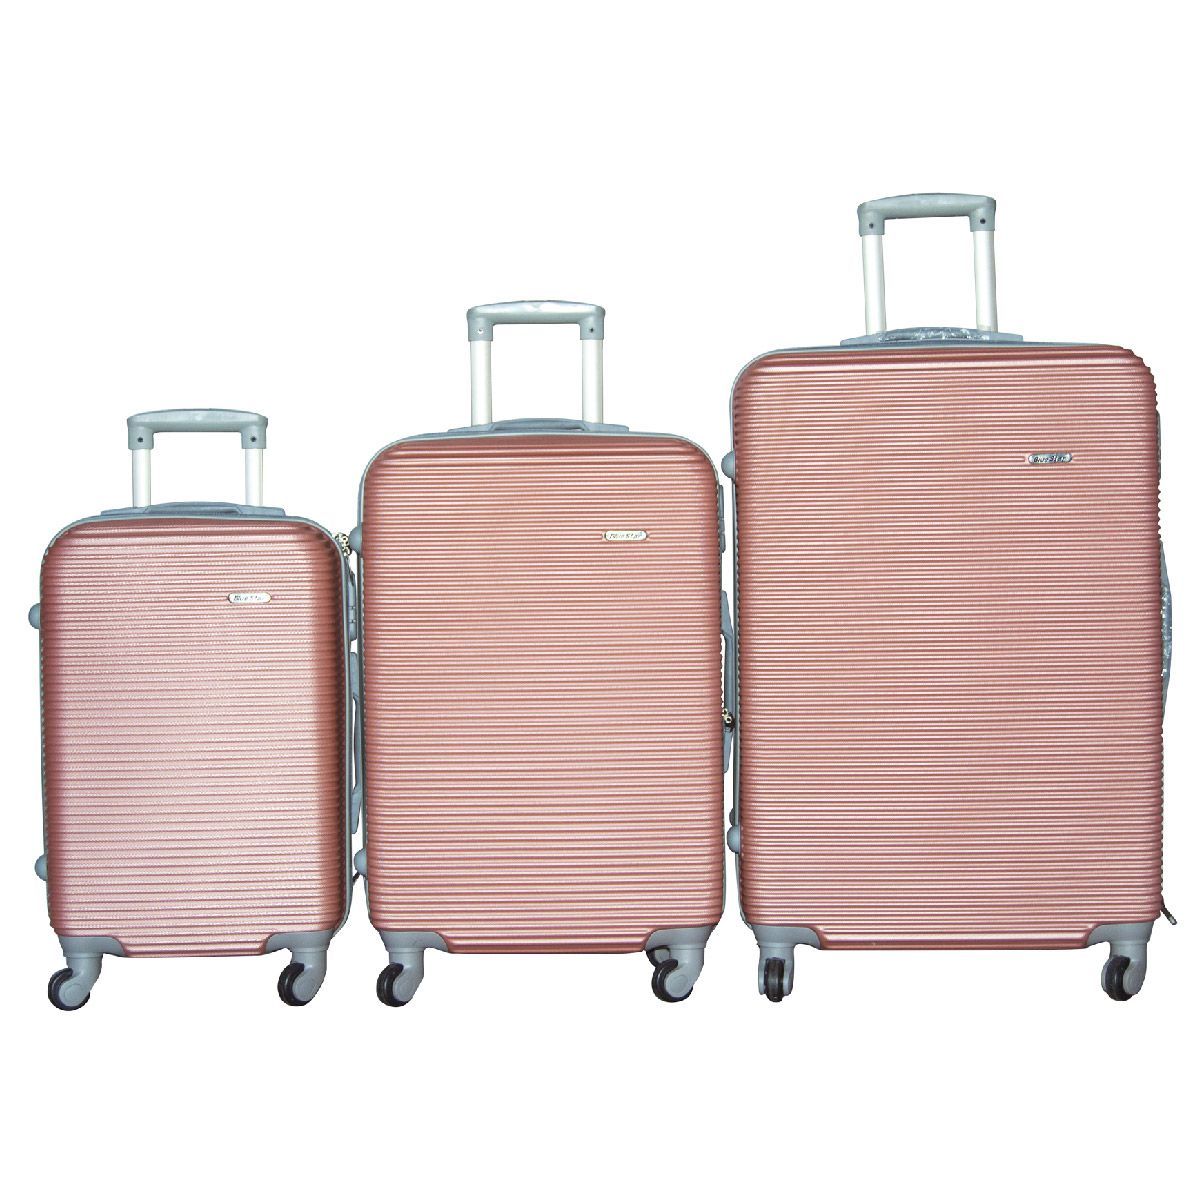 3 Piece Hard Outer Shell Luggage Set - 31inch